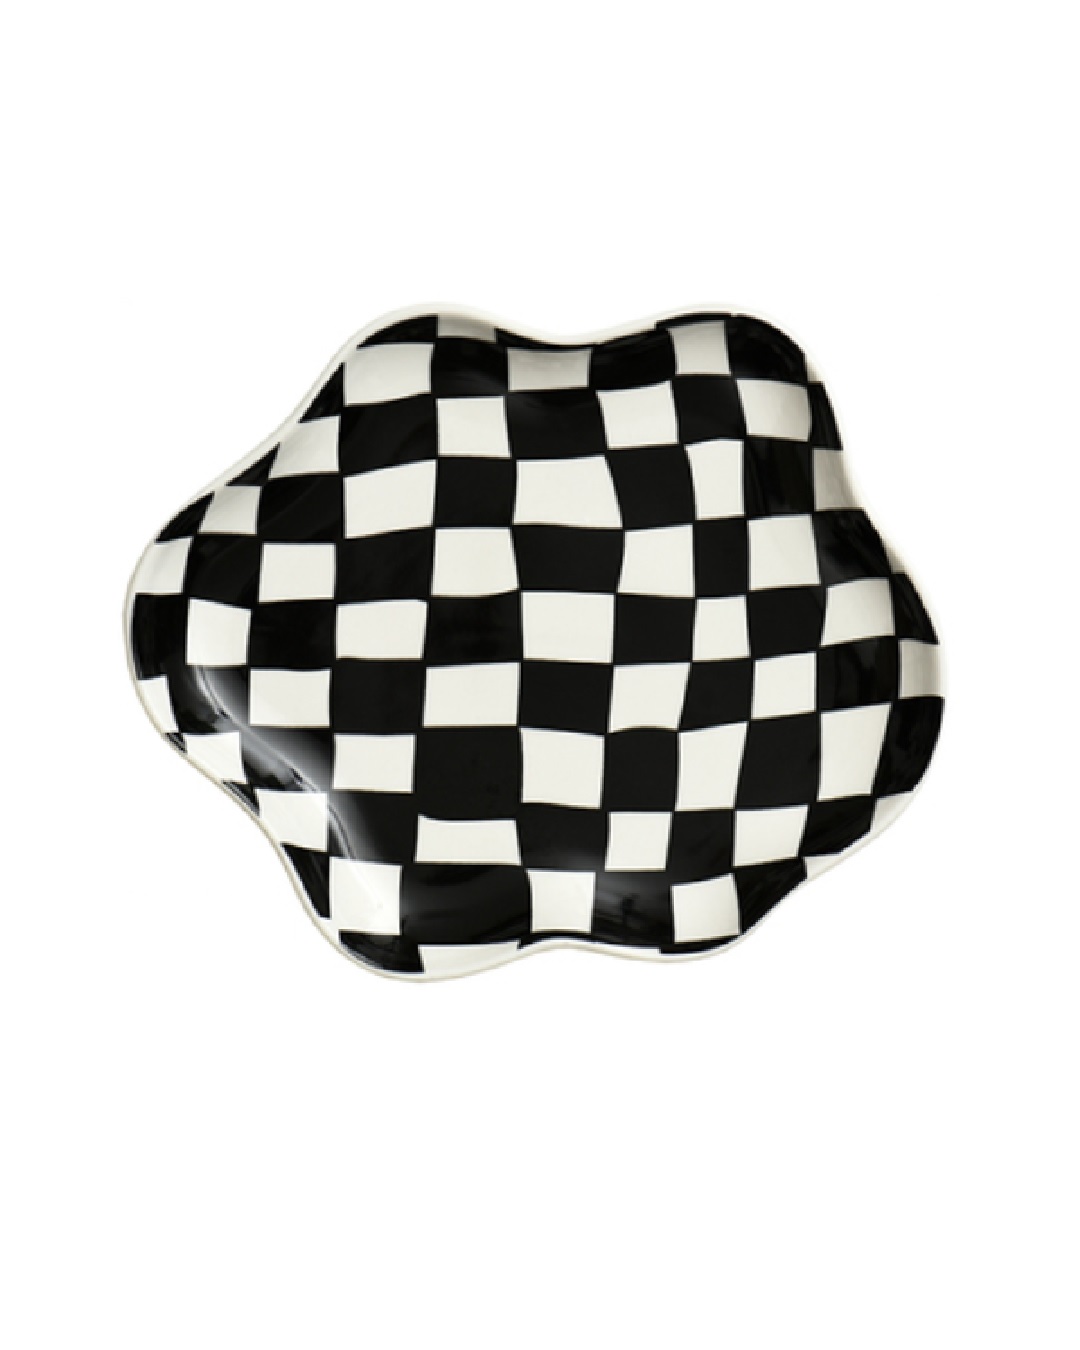 Black and white check retro abstract shaped plate